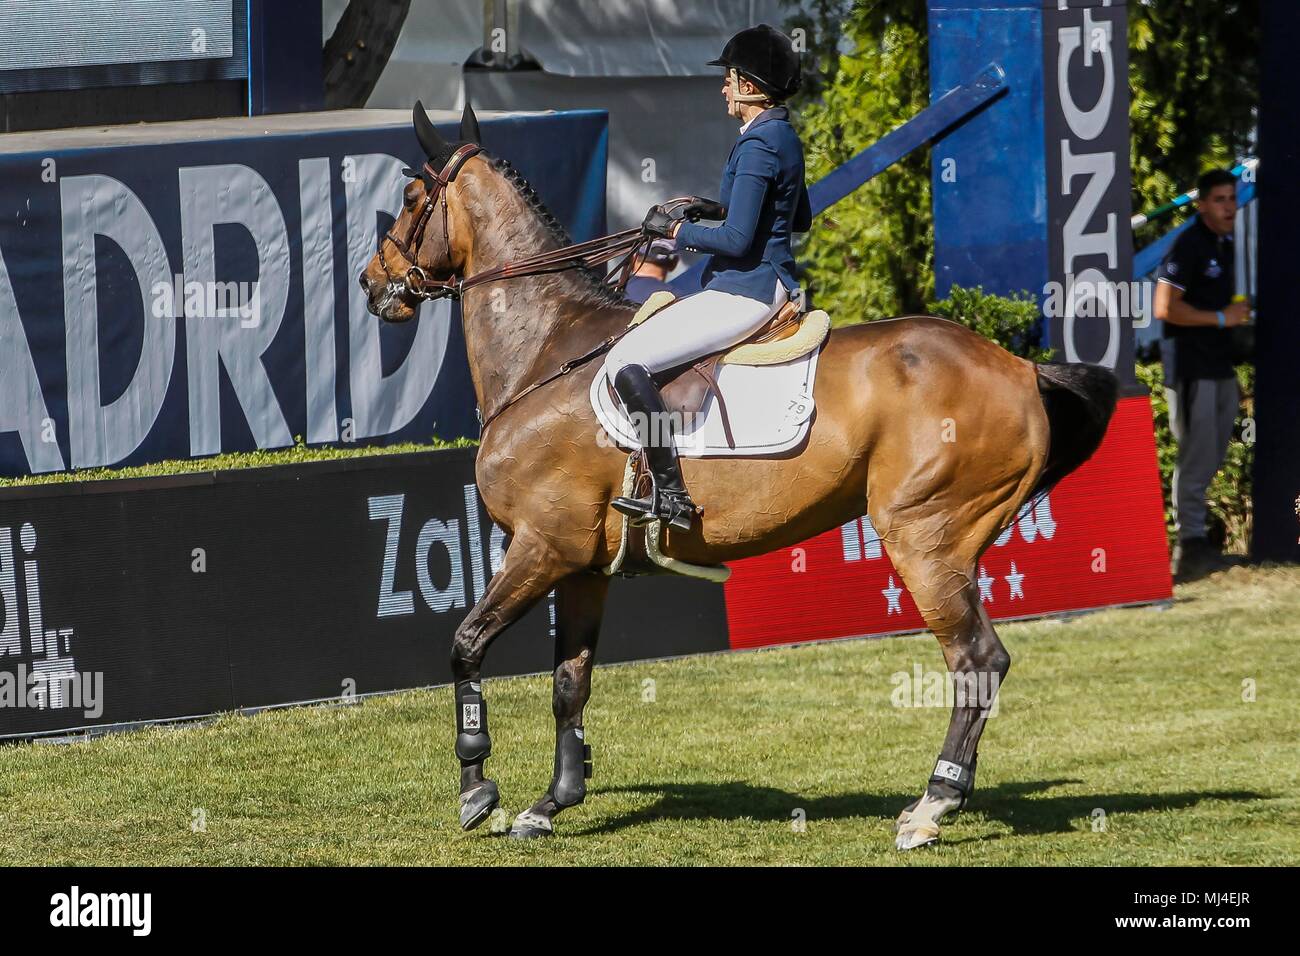 Madrid, Spain. 04th May, 2018. Athina Onassis participates in the Longines Global Champions Tour 2018 at the Country Club of Madrid in Madrid, Spain. May04, 2018. Credit: Jimmy Olsen/Media Punch ***No Spain***/Alamy Live News Stock Photo